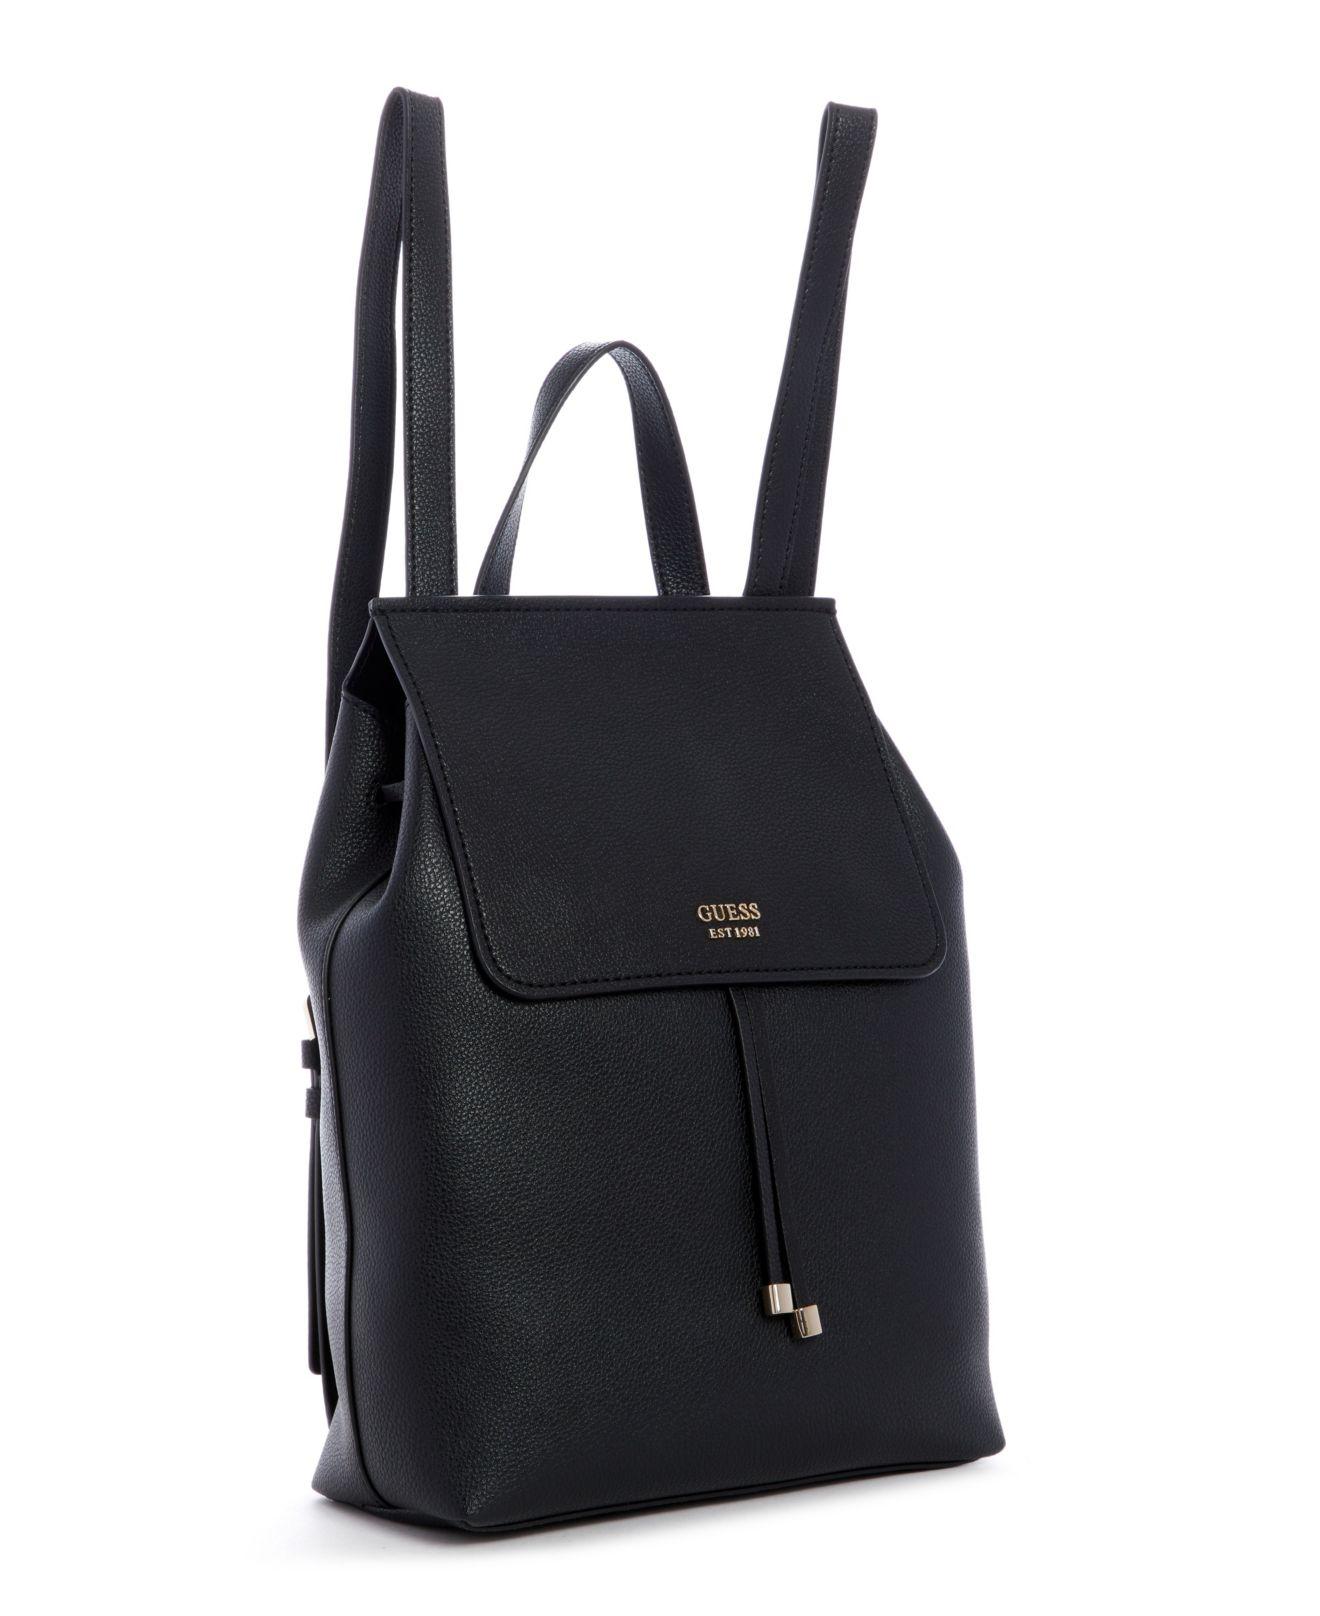 Vegan leather backpack GUESS Black in Vegan leather - 41222944